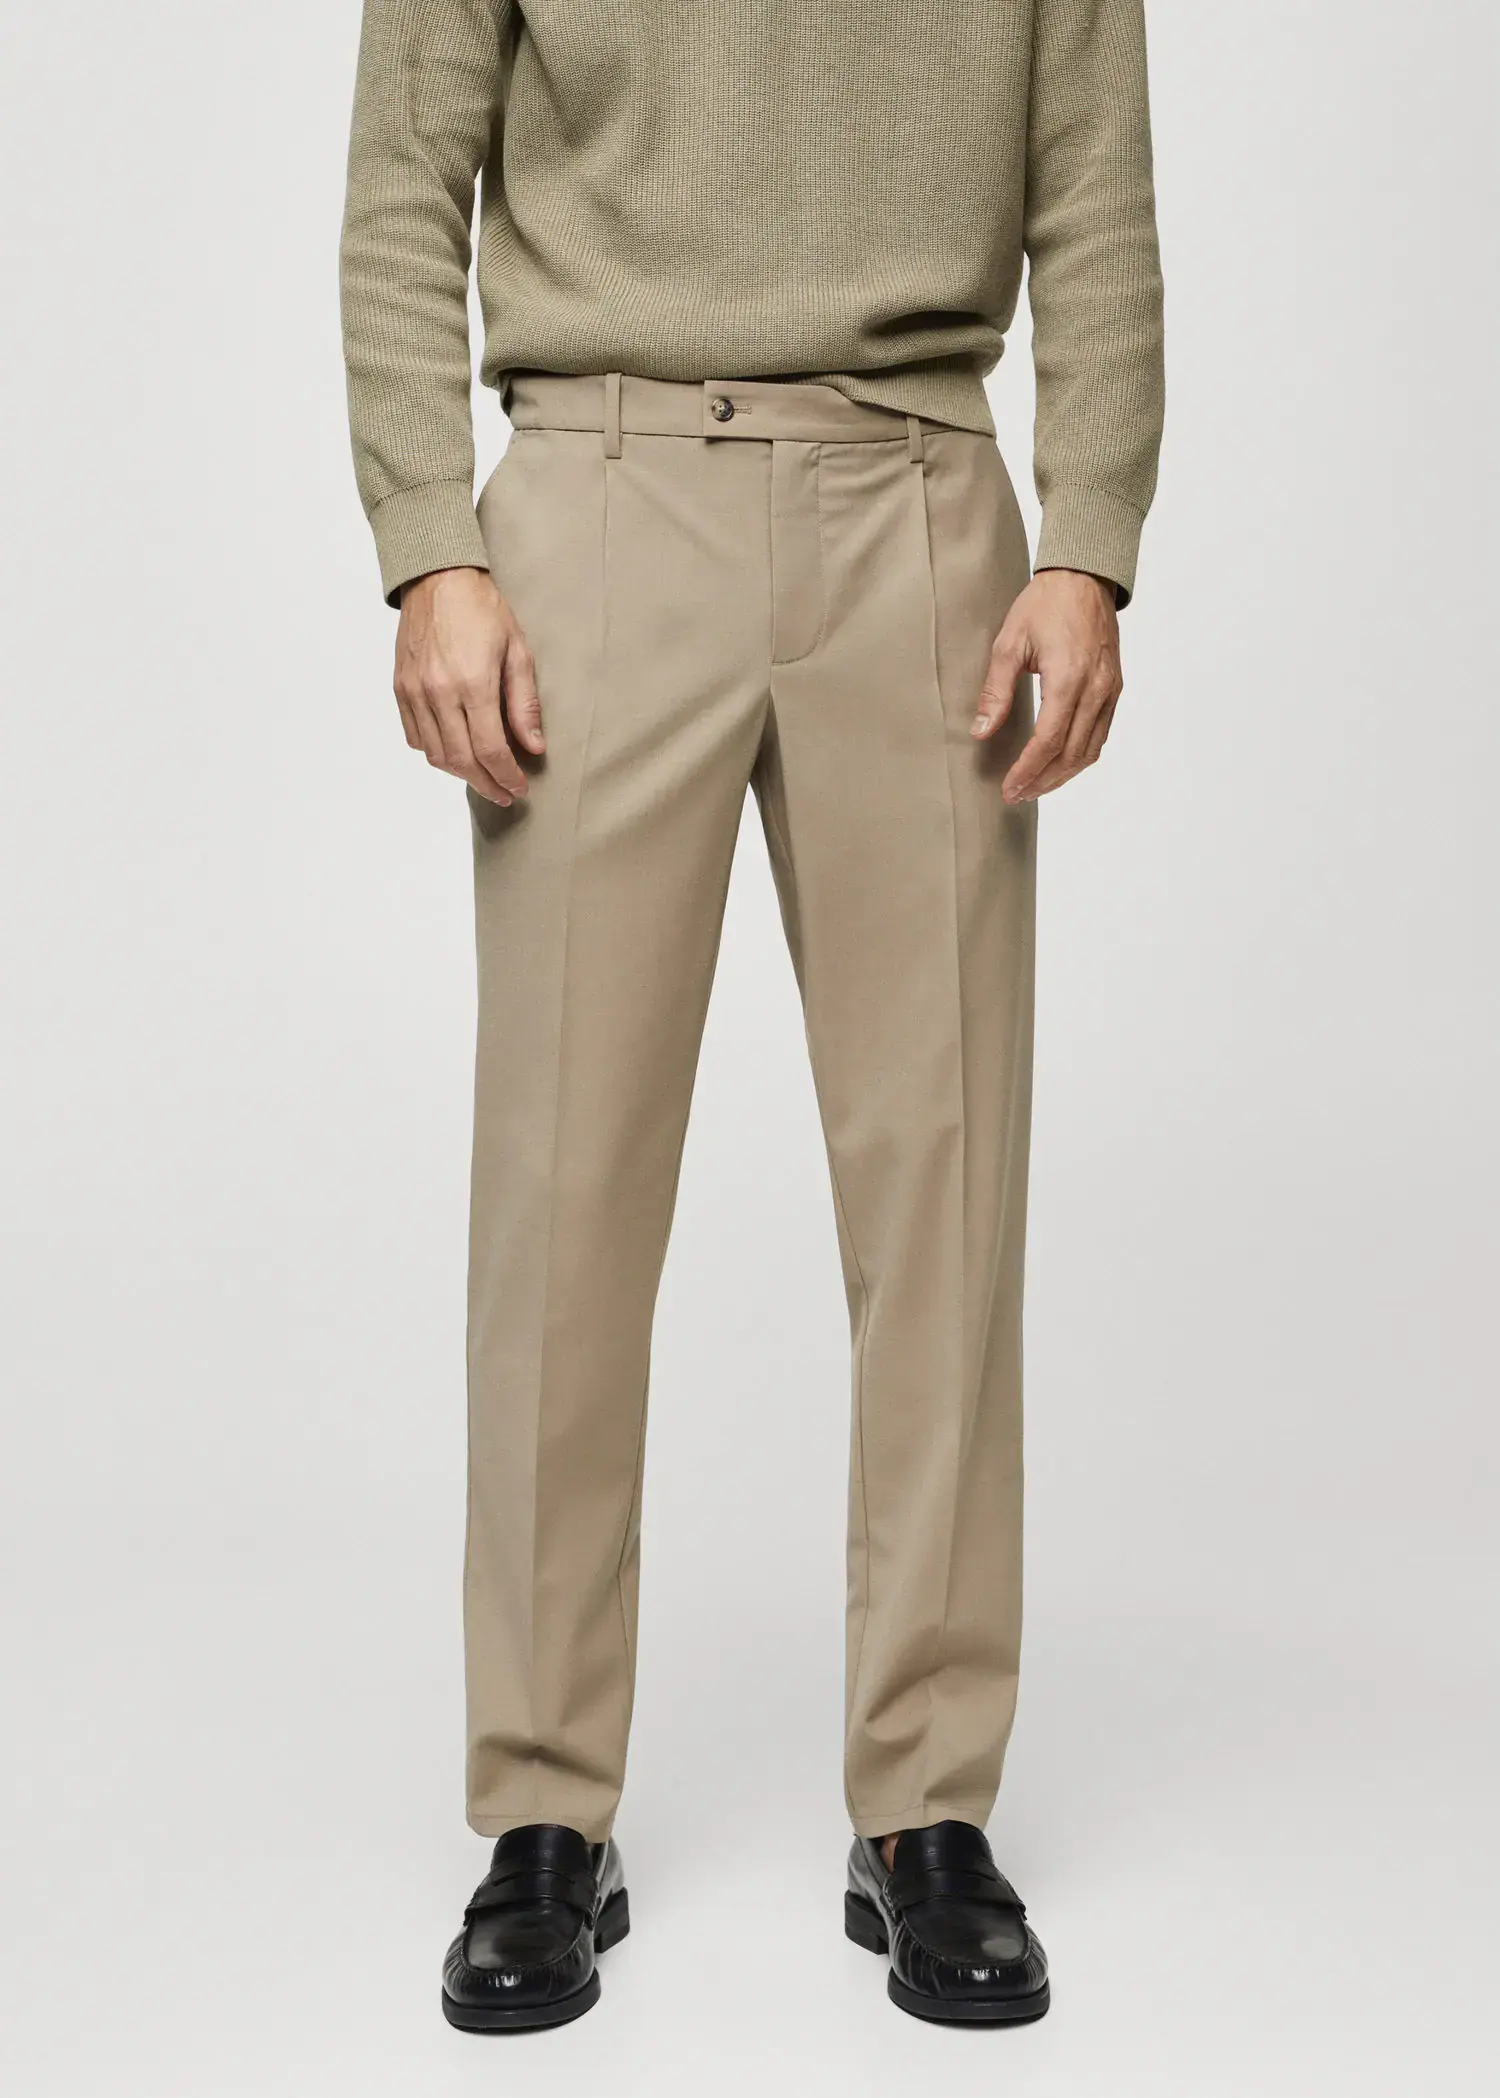 Mango Cold wool trousers with pleat detail. 2